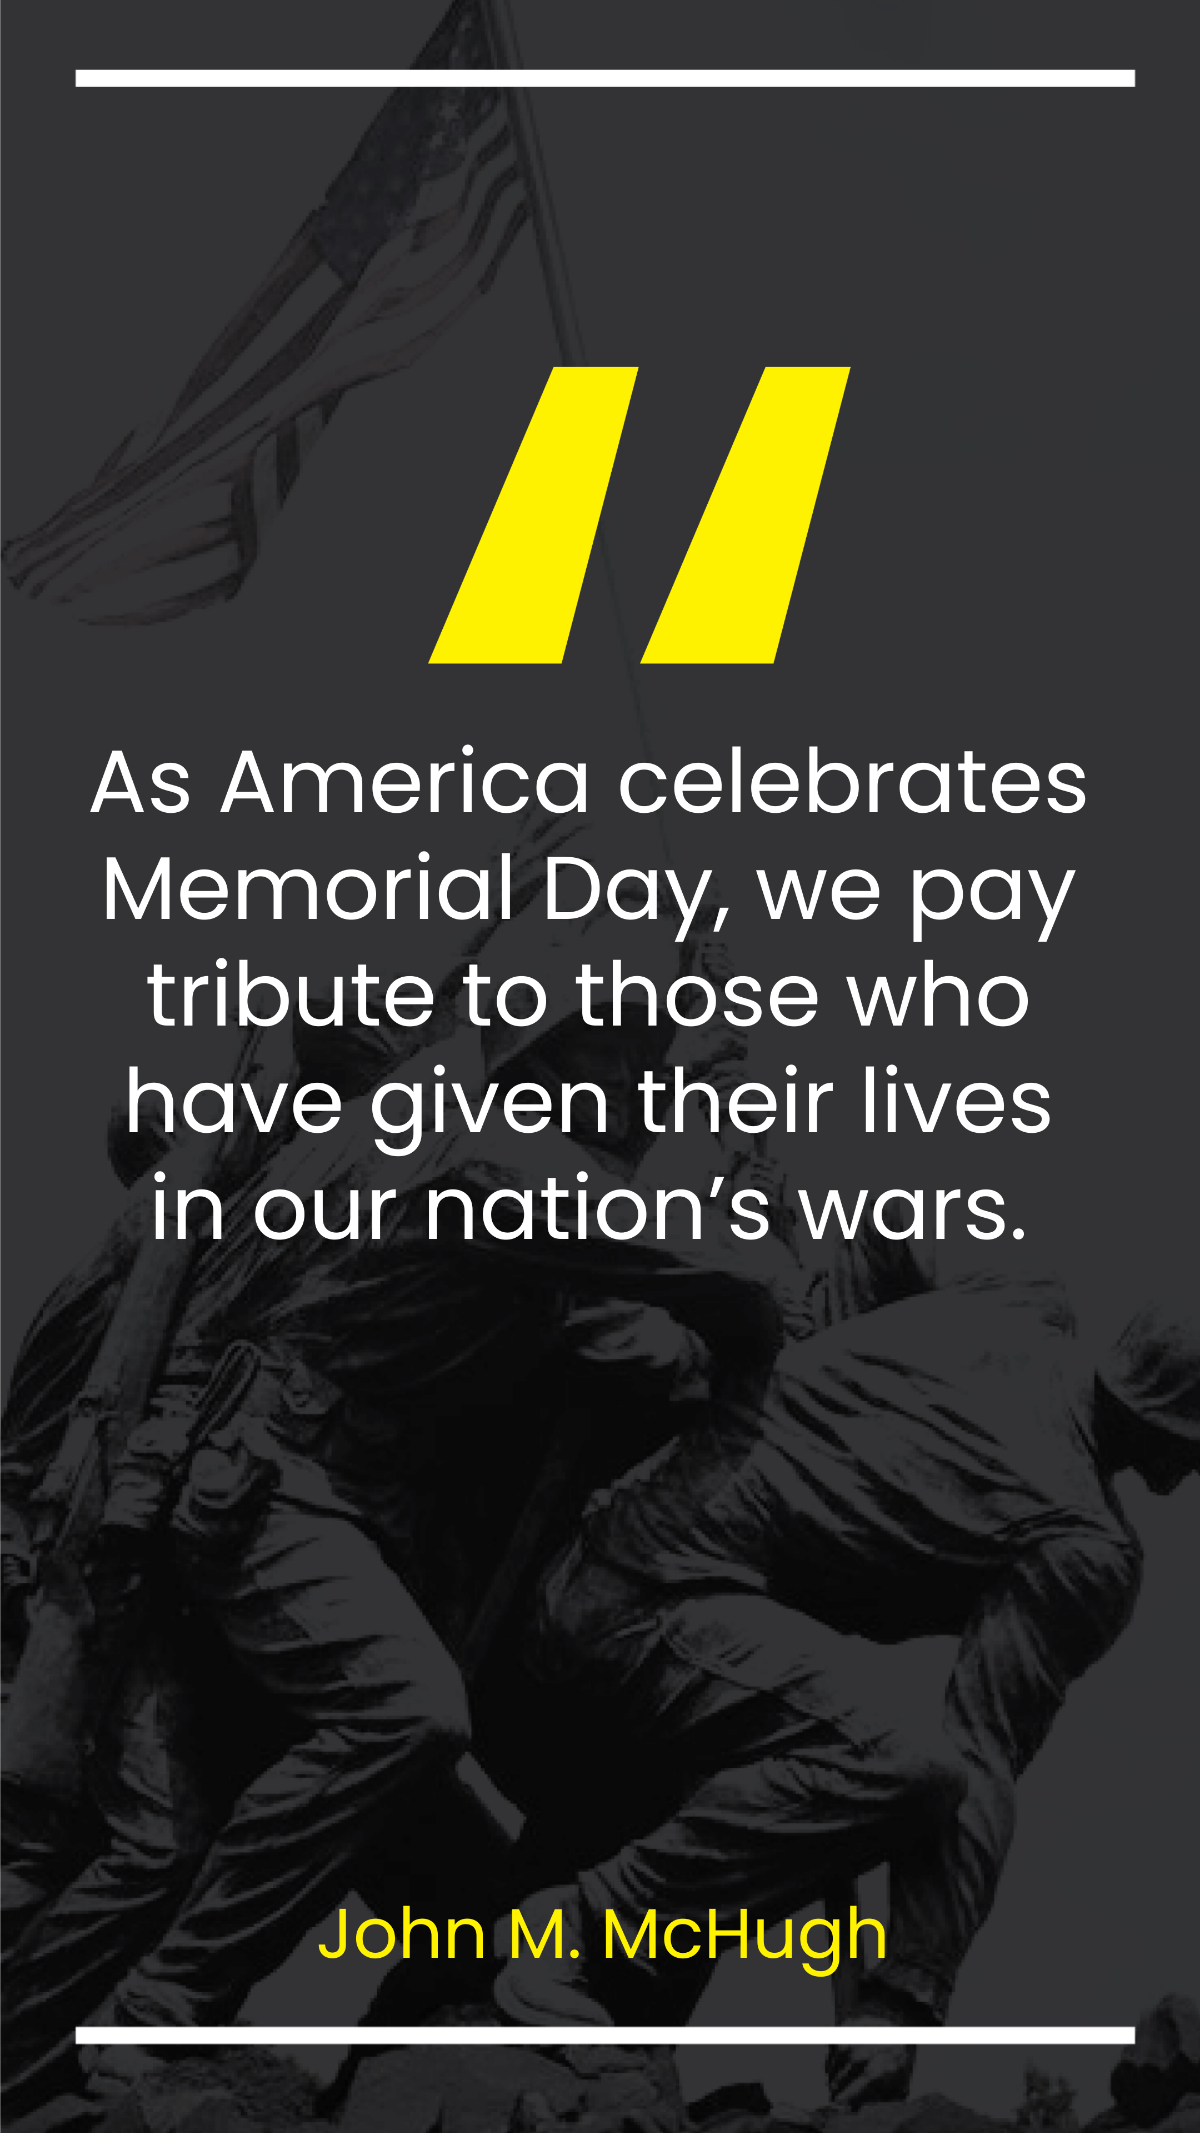 Free John M. McHugh - As America celebrates Memorial Day, we pay tribute to those who have given their lives in our nation's wars. Template